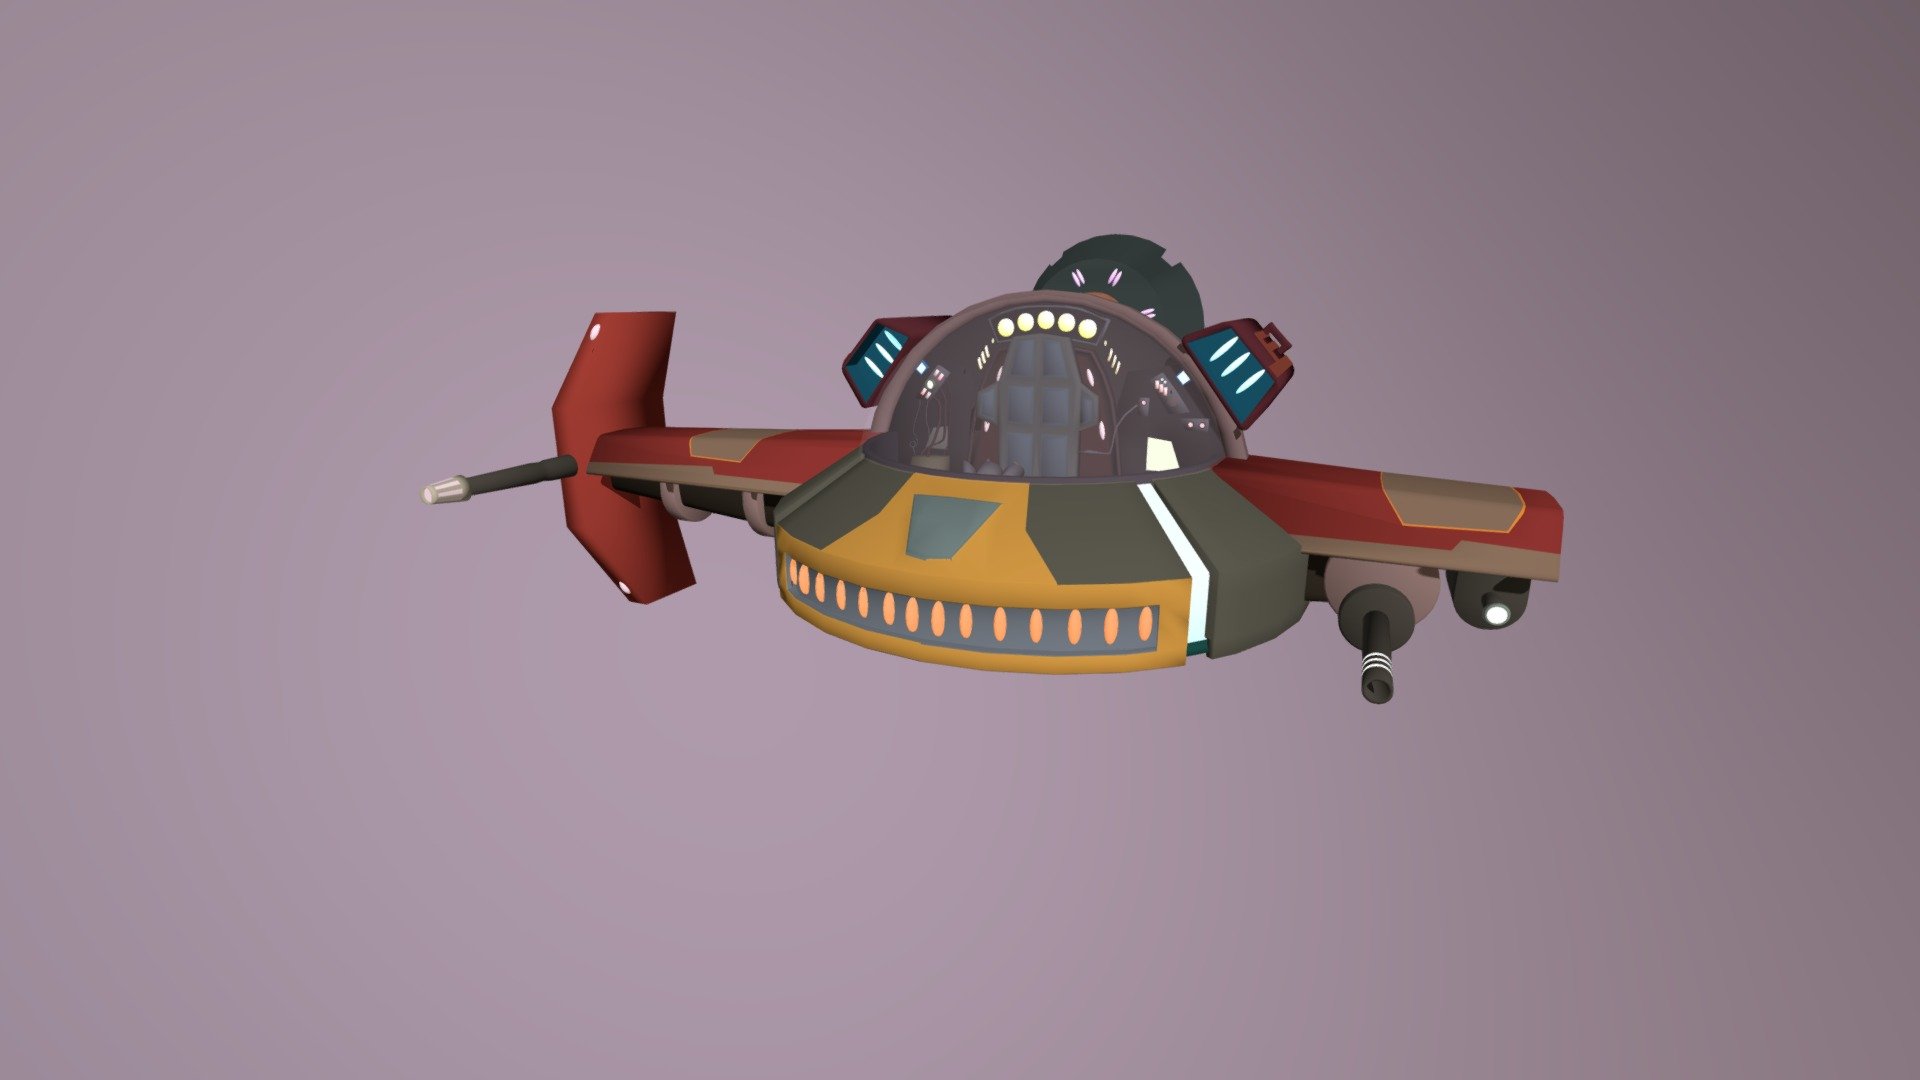 Beth Spaceship from Rick and Morty - 3D model by redketchum (@redketchum)  [cc516f8]